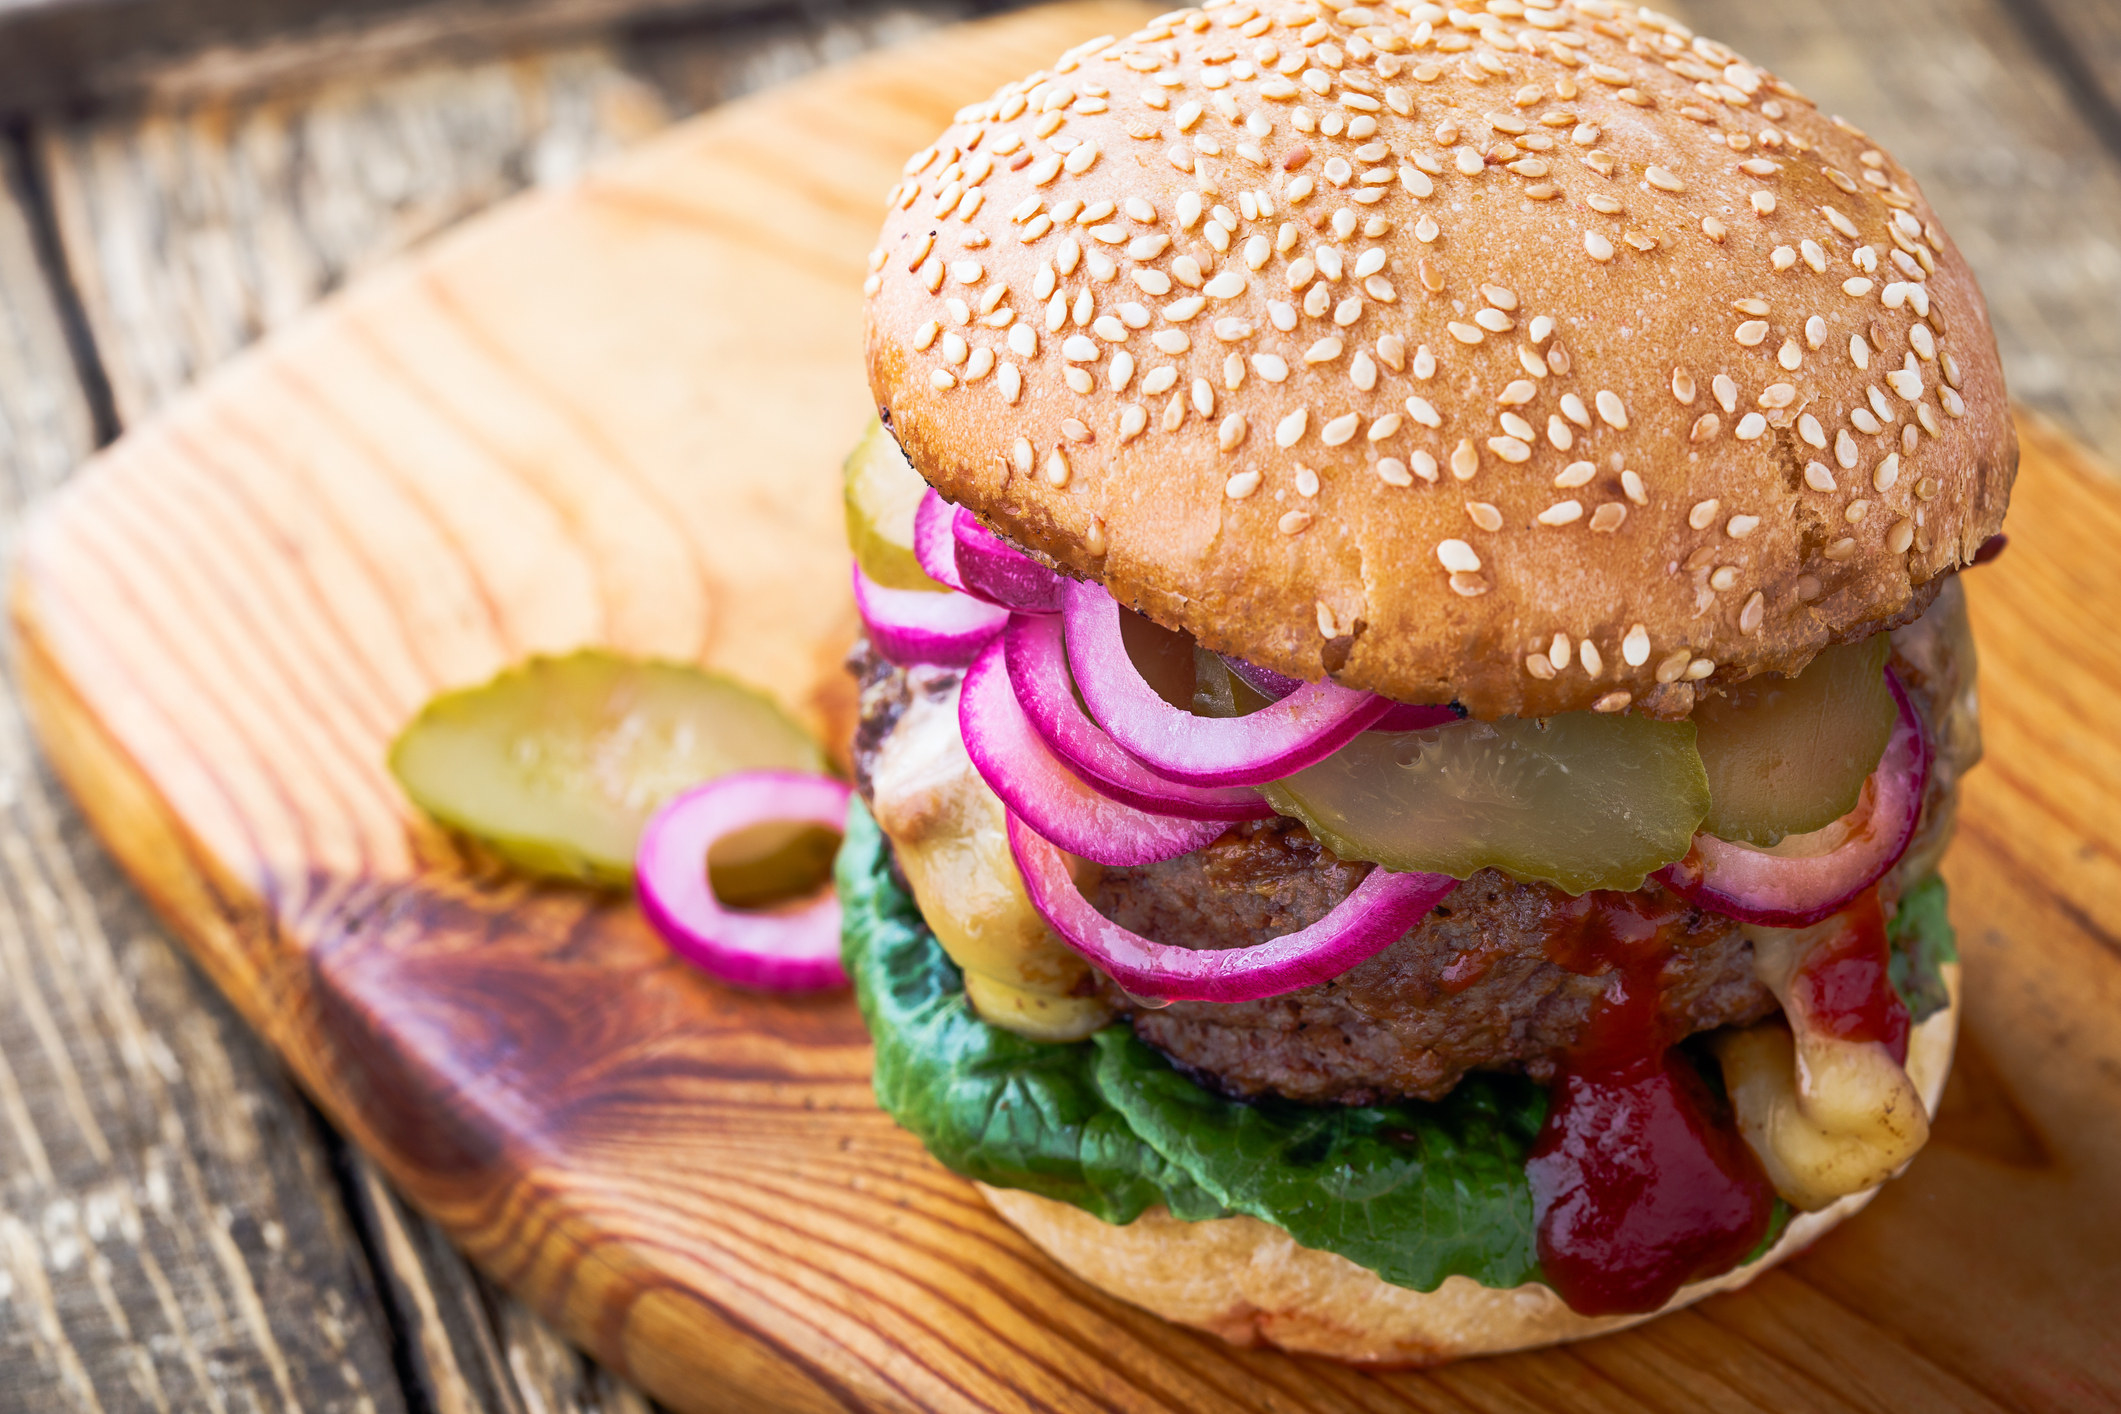 A burger topped with pickled red onions.